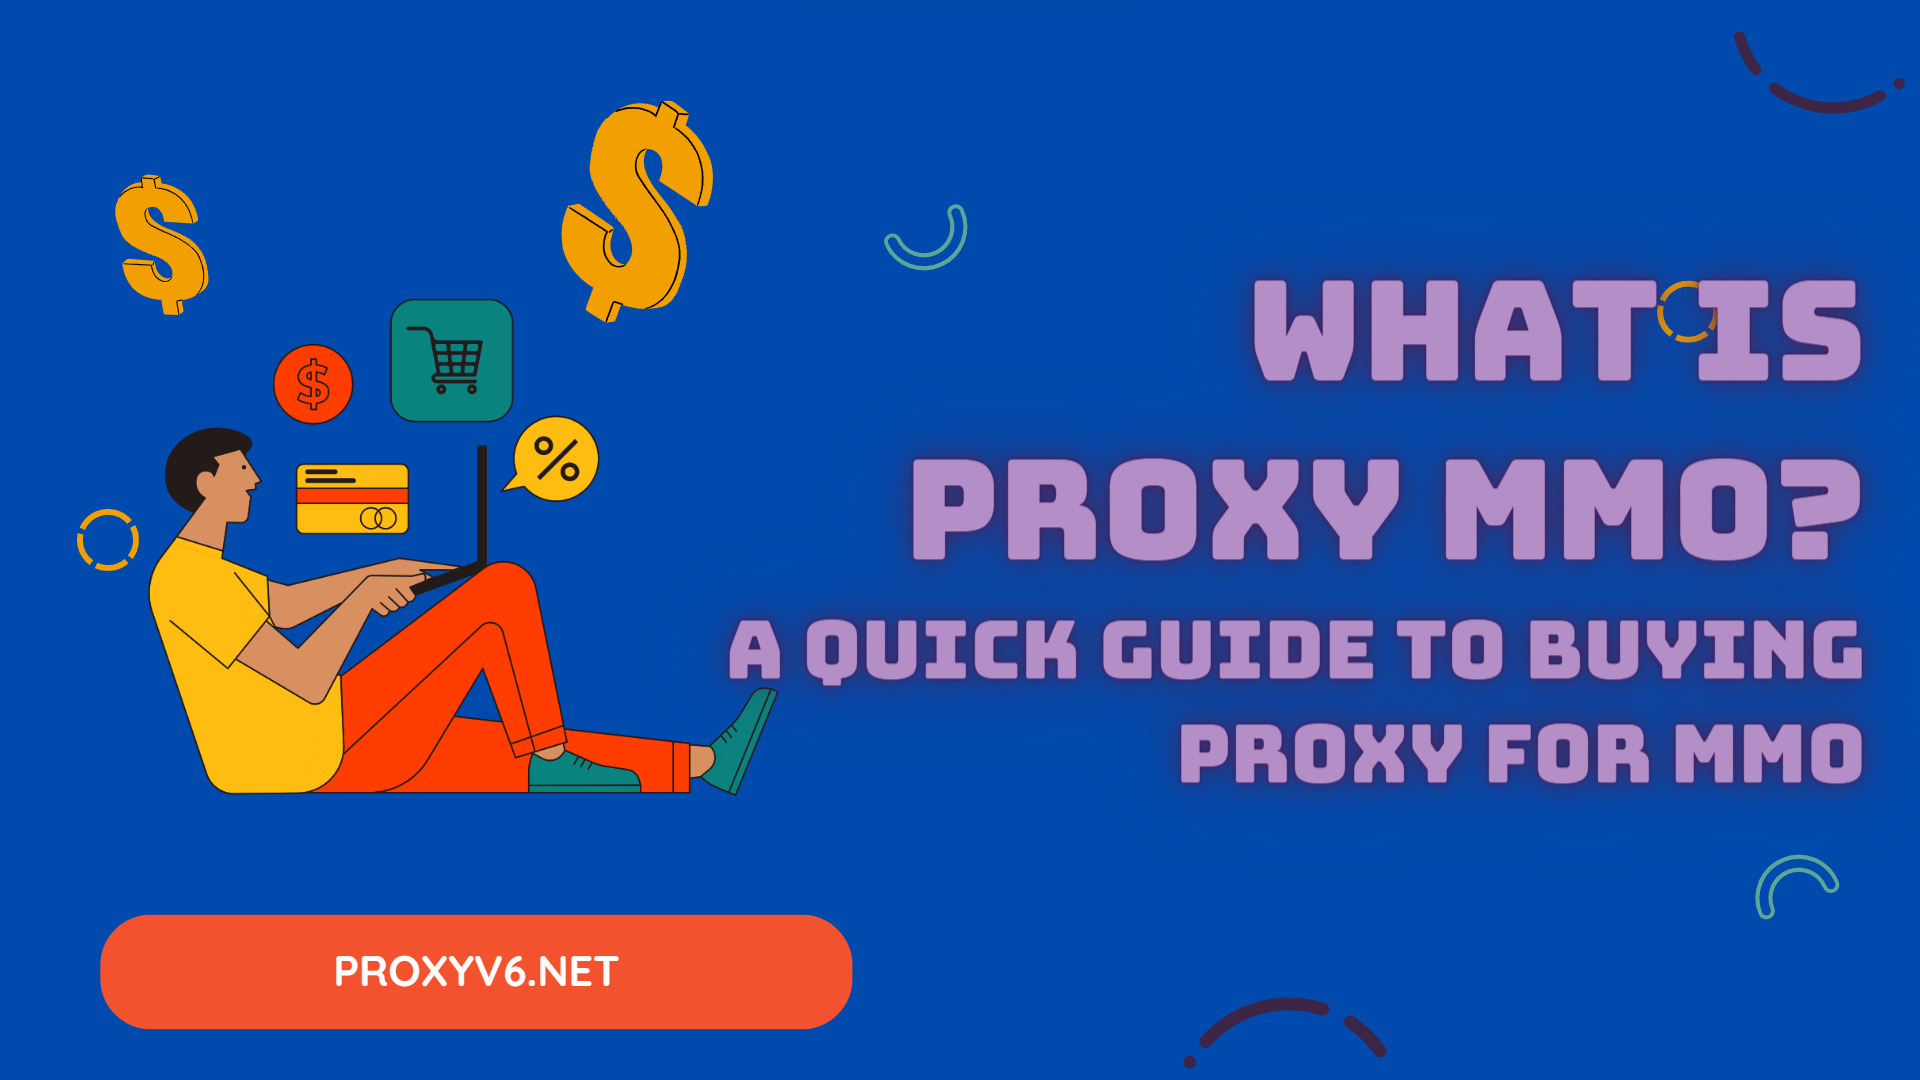 What is Proxy MMO? A quick guide to buying Proxy for MMO